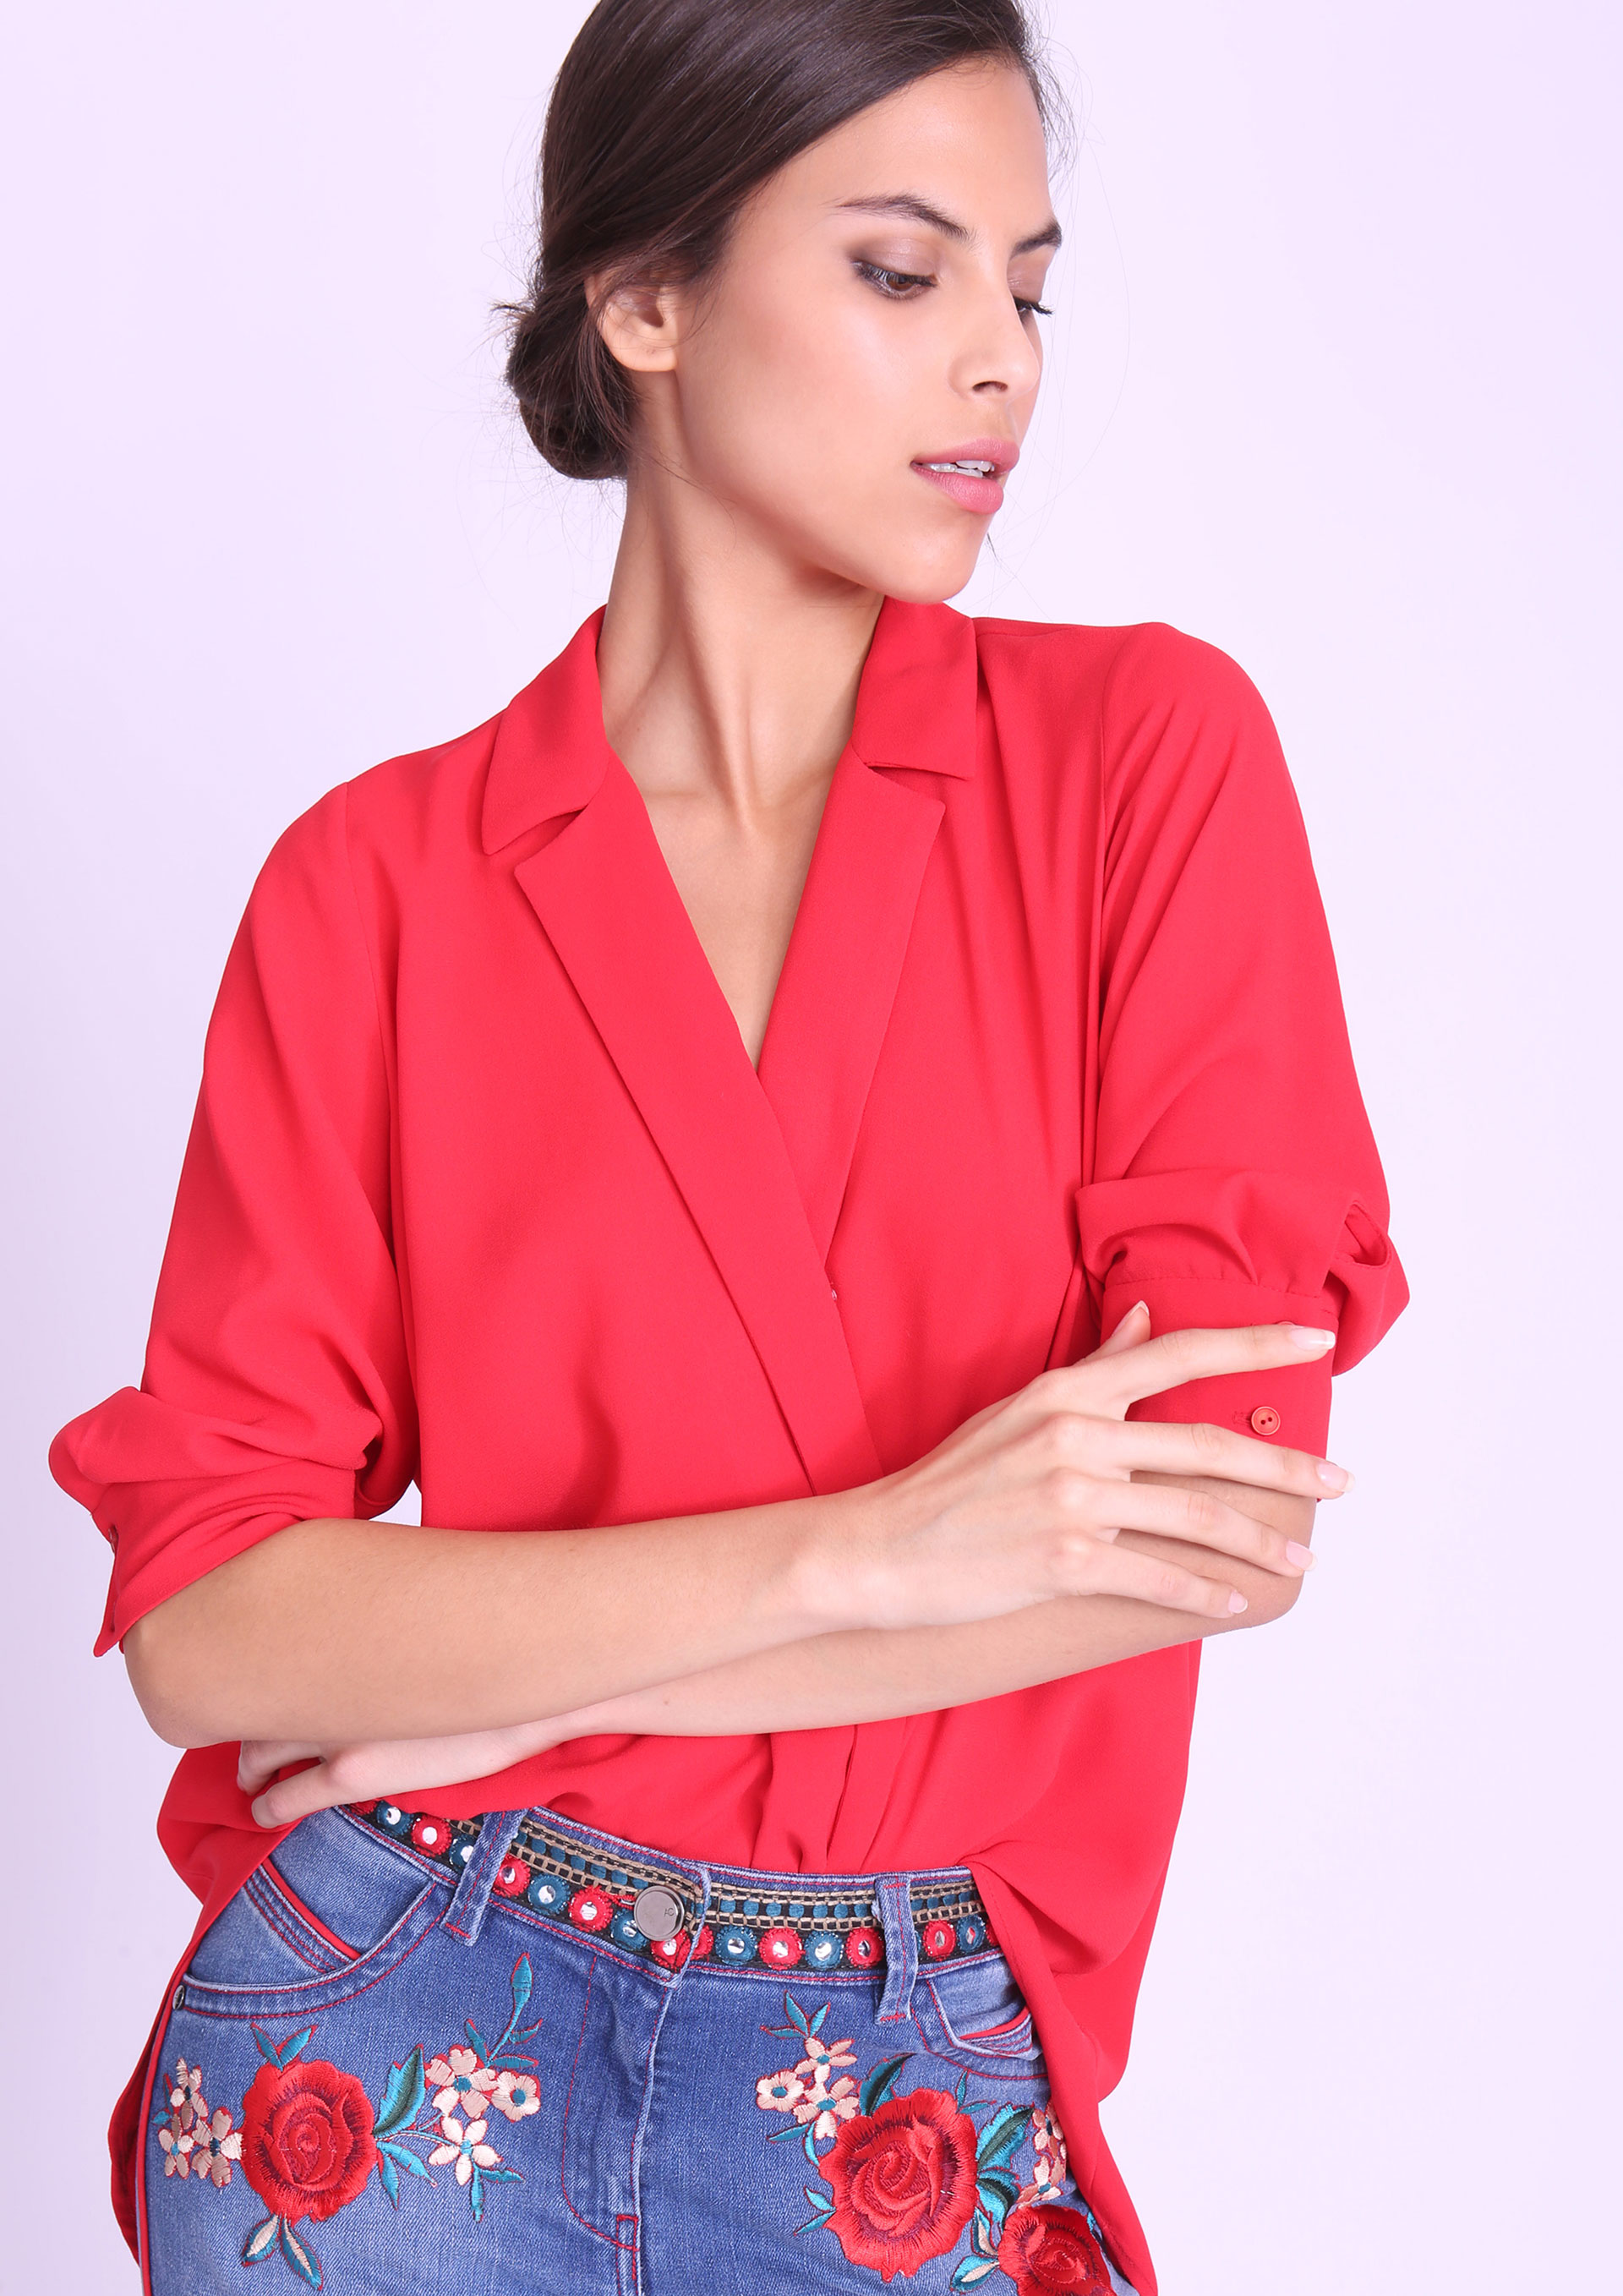 Cross-over blouse in red